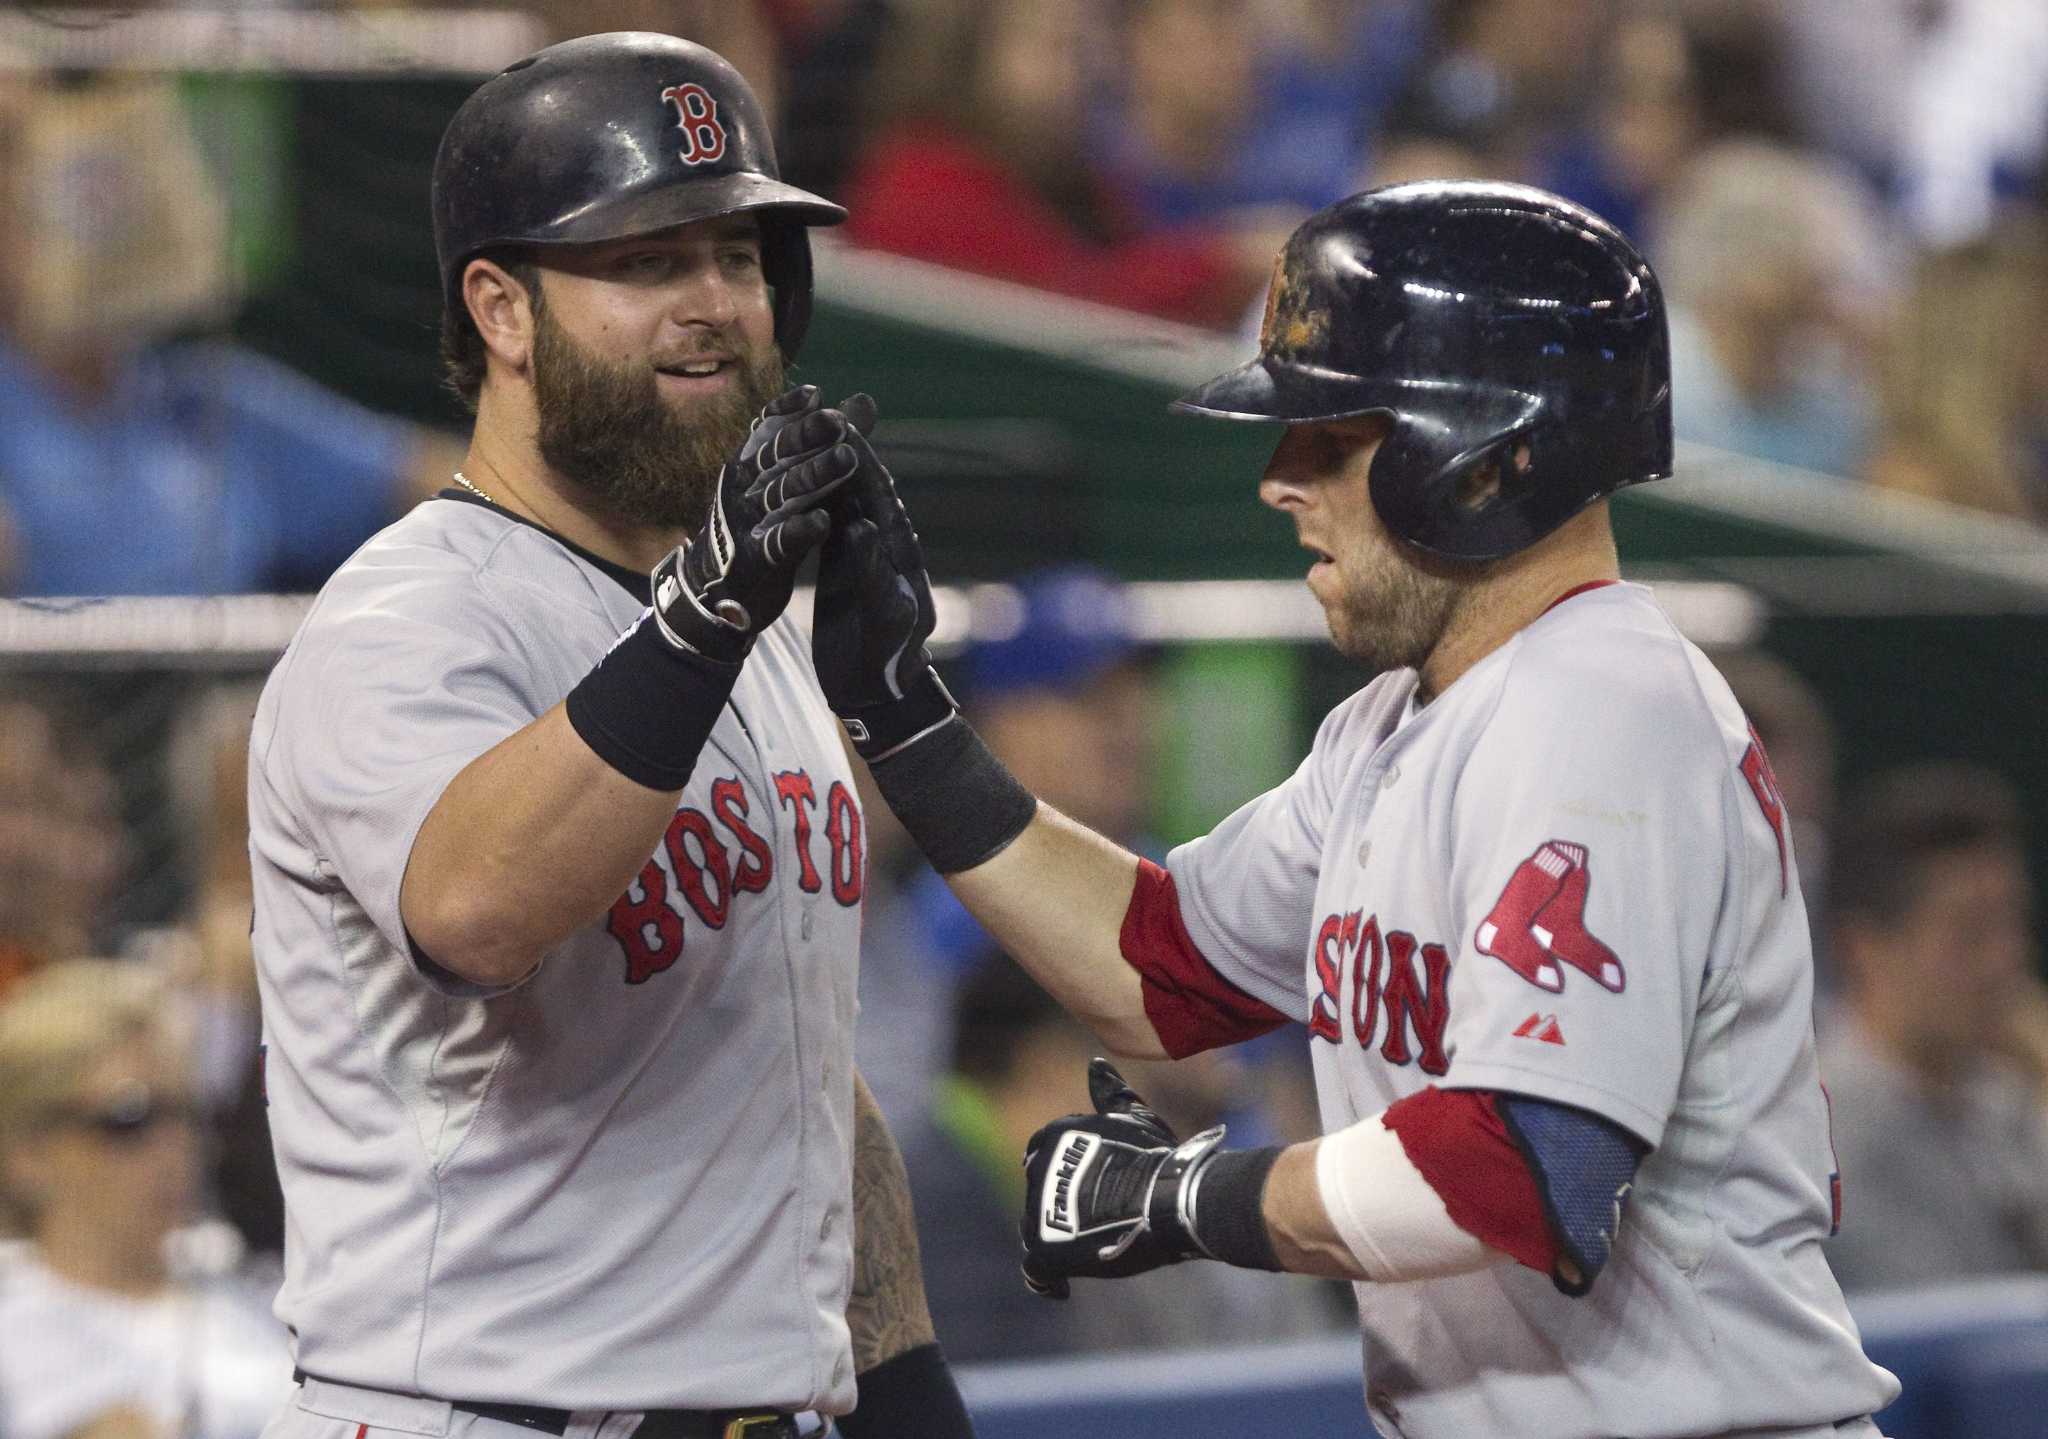 Mike Napoli's former teammate doesn't think he's Hall of Fame